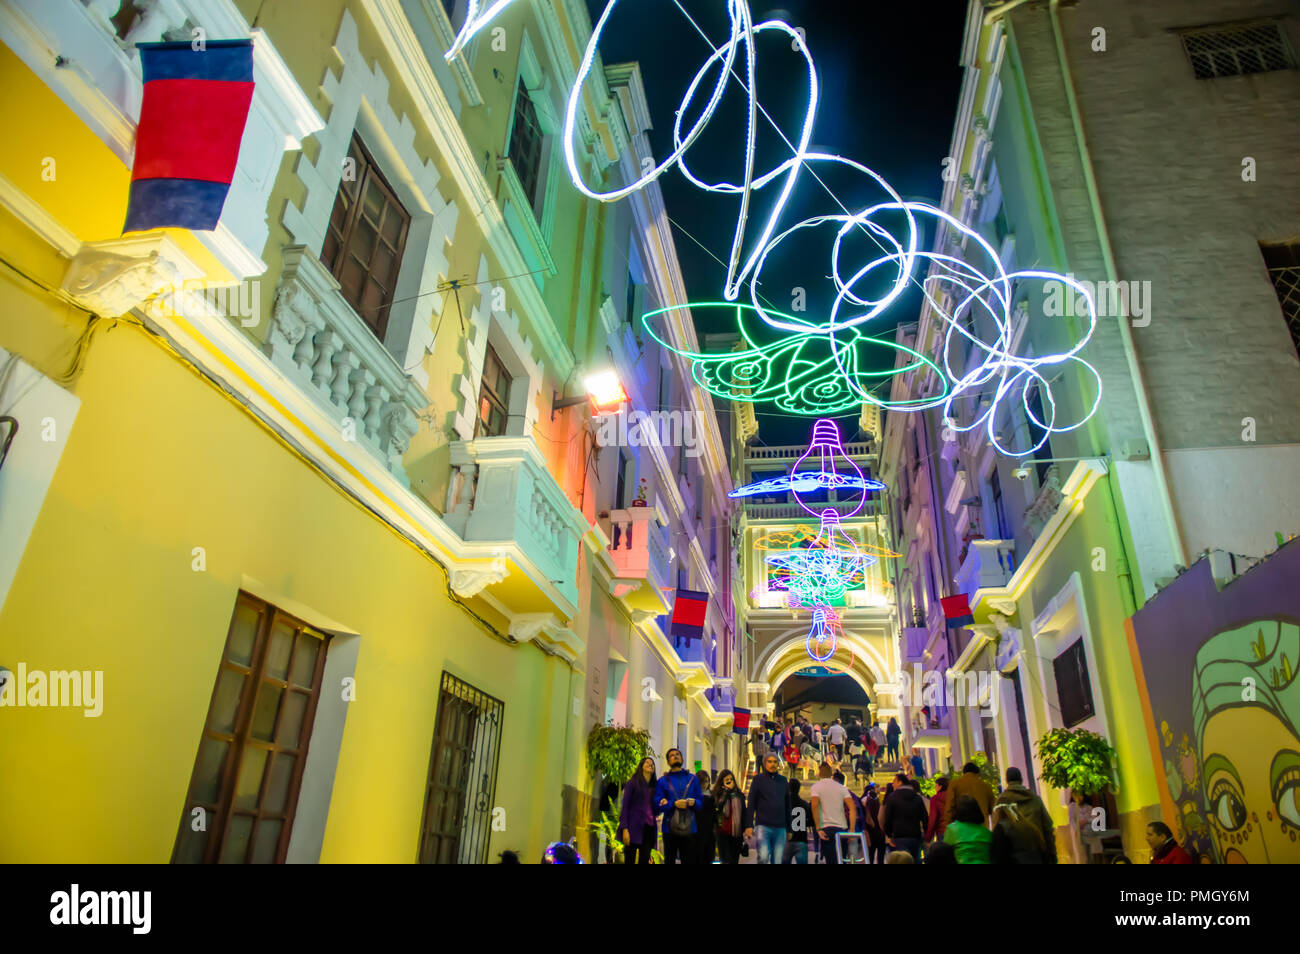 QUITO, ECUADOR- AUGUST, 15, 2018: Crowd of people walking in a tight street during a spectacle of lights projected on the walls with some illuminated figures during the Quito light festival Stock Photo